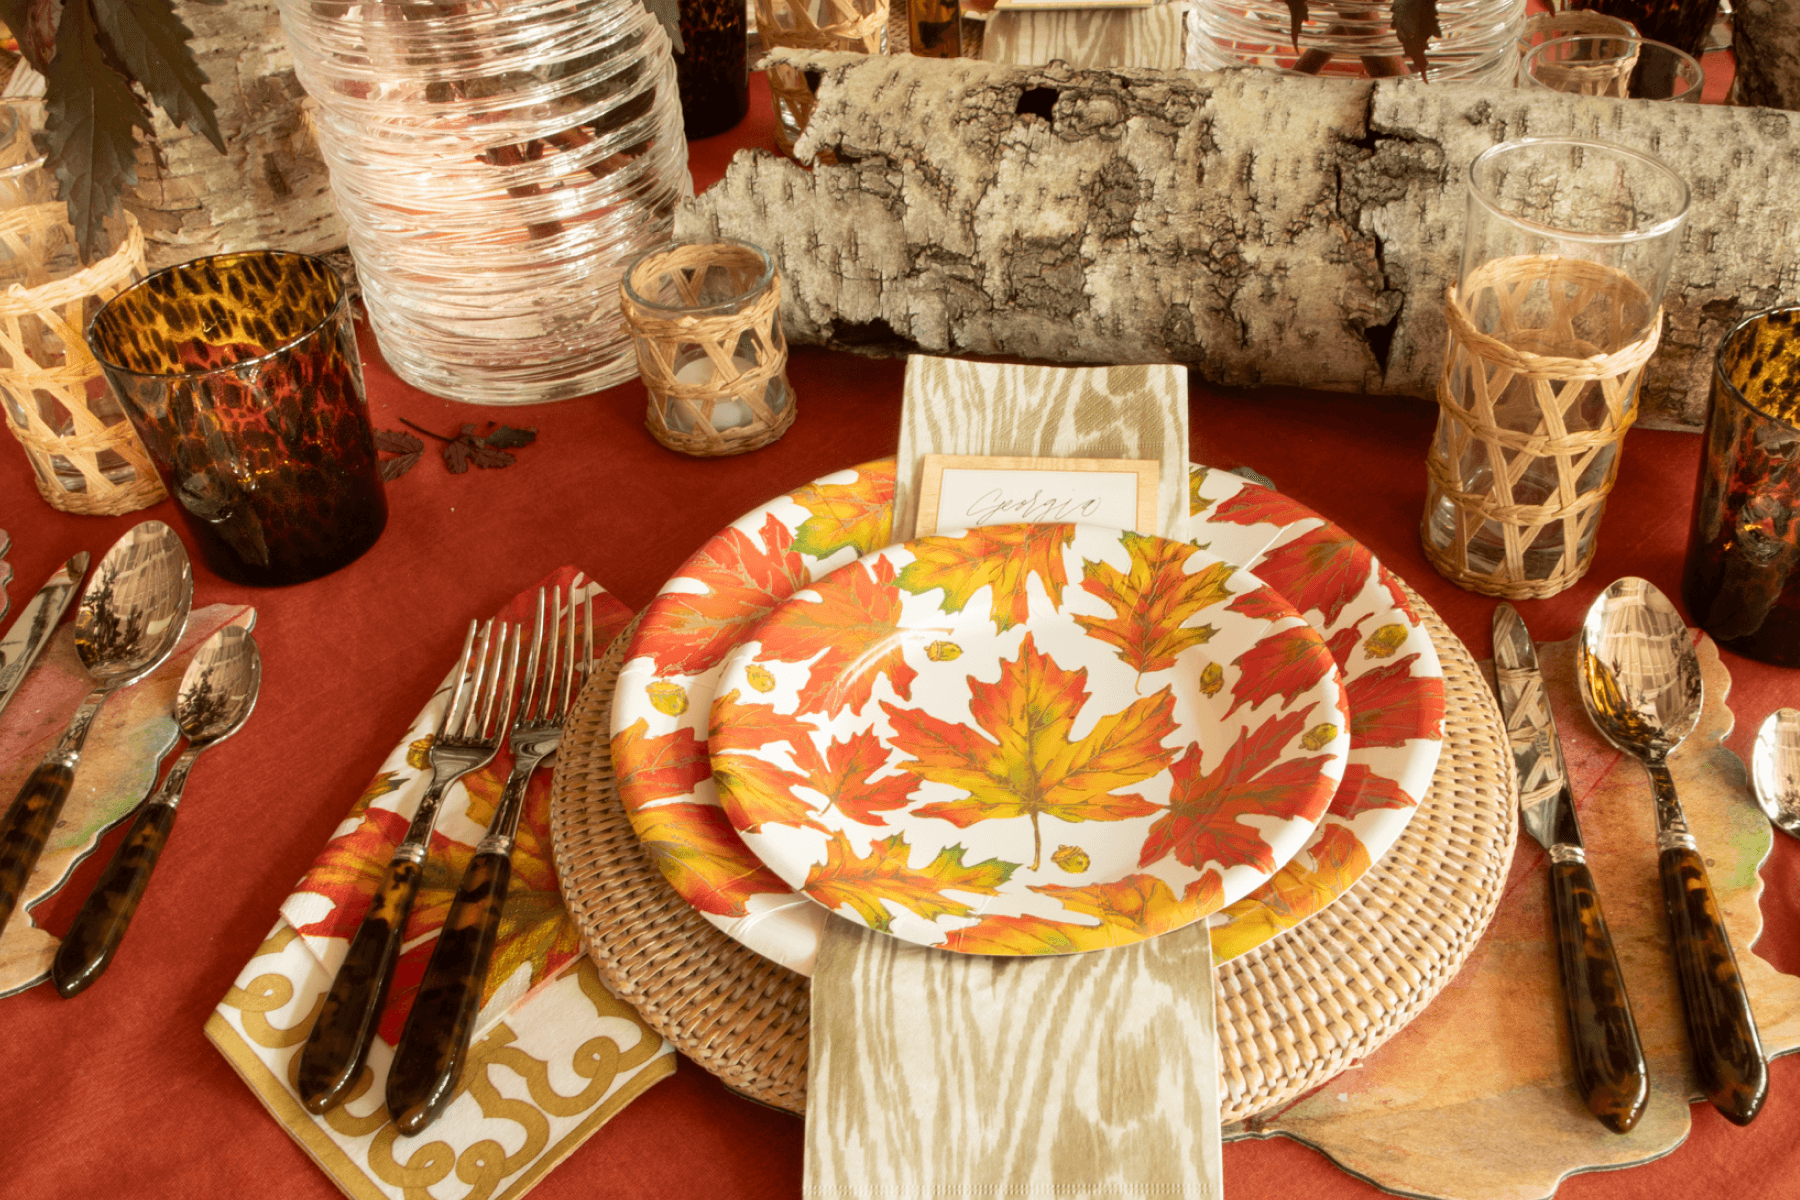 Autumn Paper Plates and Napkins, Cups, Cutlery for Thanksgiving